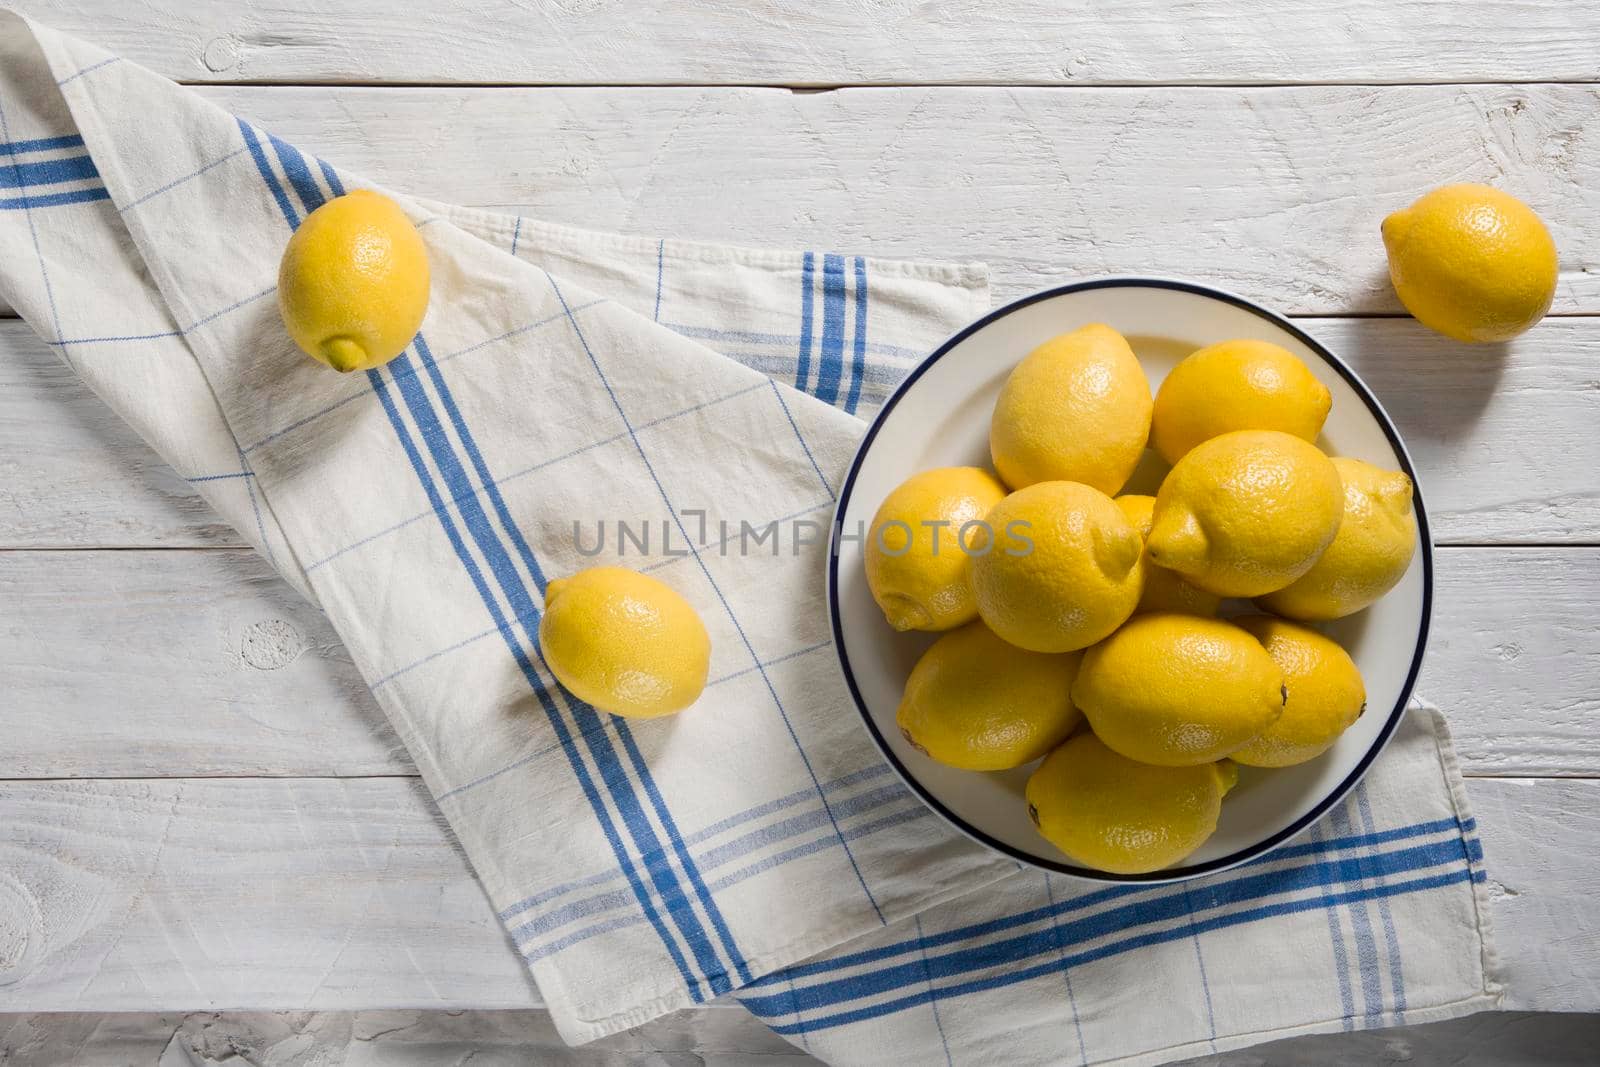 yellow lemons in a plate and on a white towel with blue stripes on white wooden boardsHigh quality photo